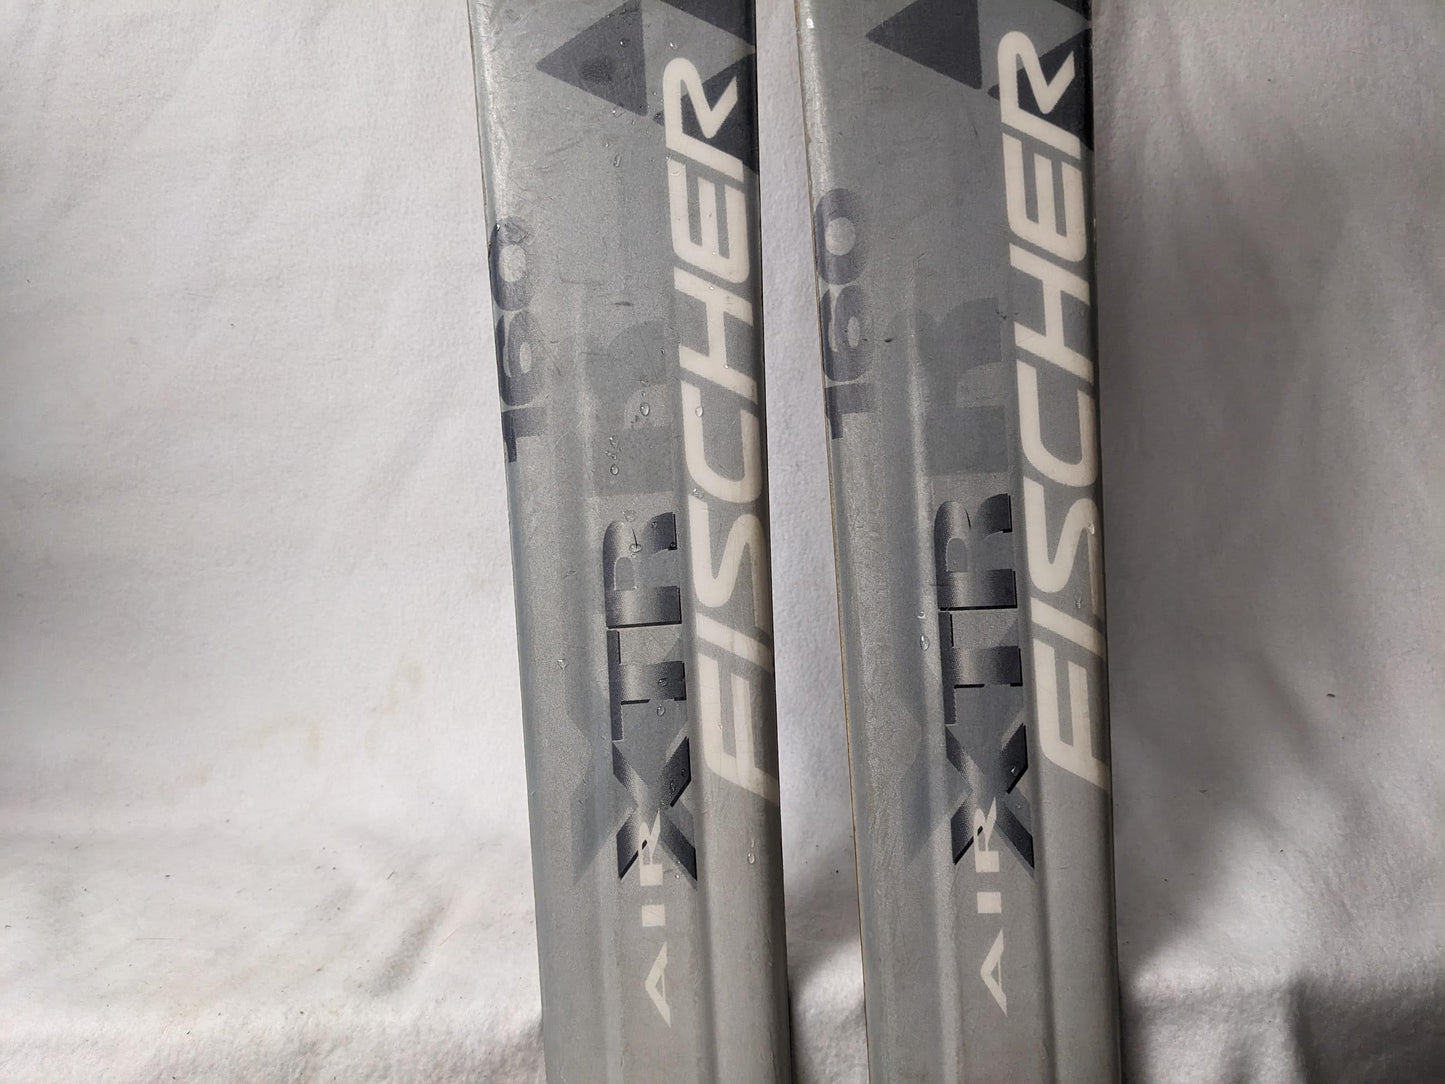 Fischer Air XTR Skis *NO Bindings* Size 160 Cm Color Gray Condition Used